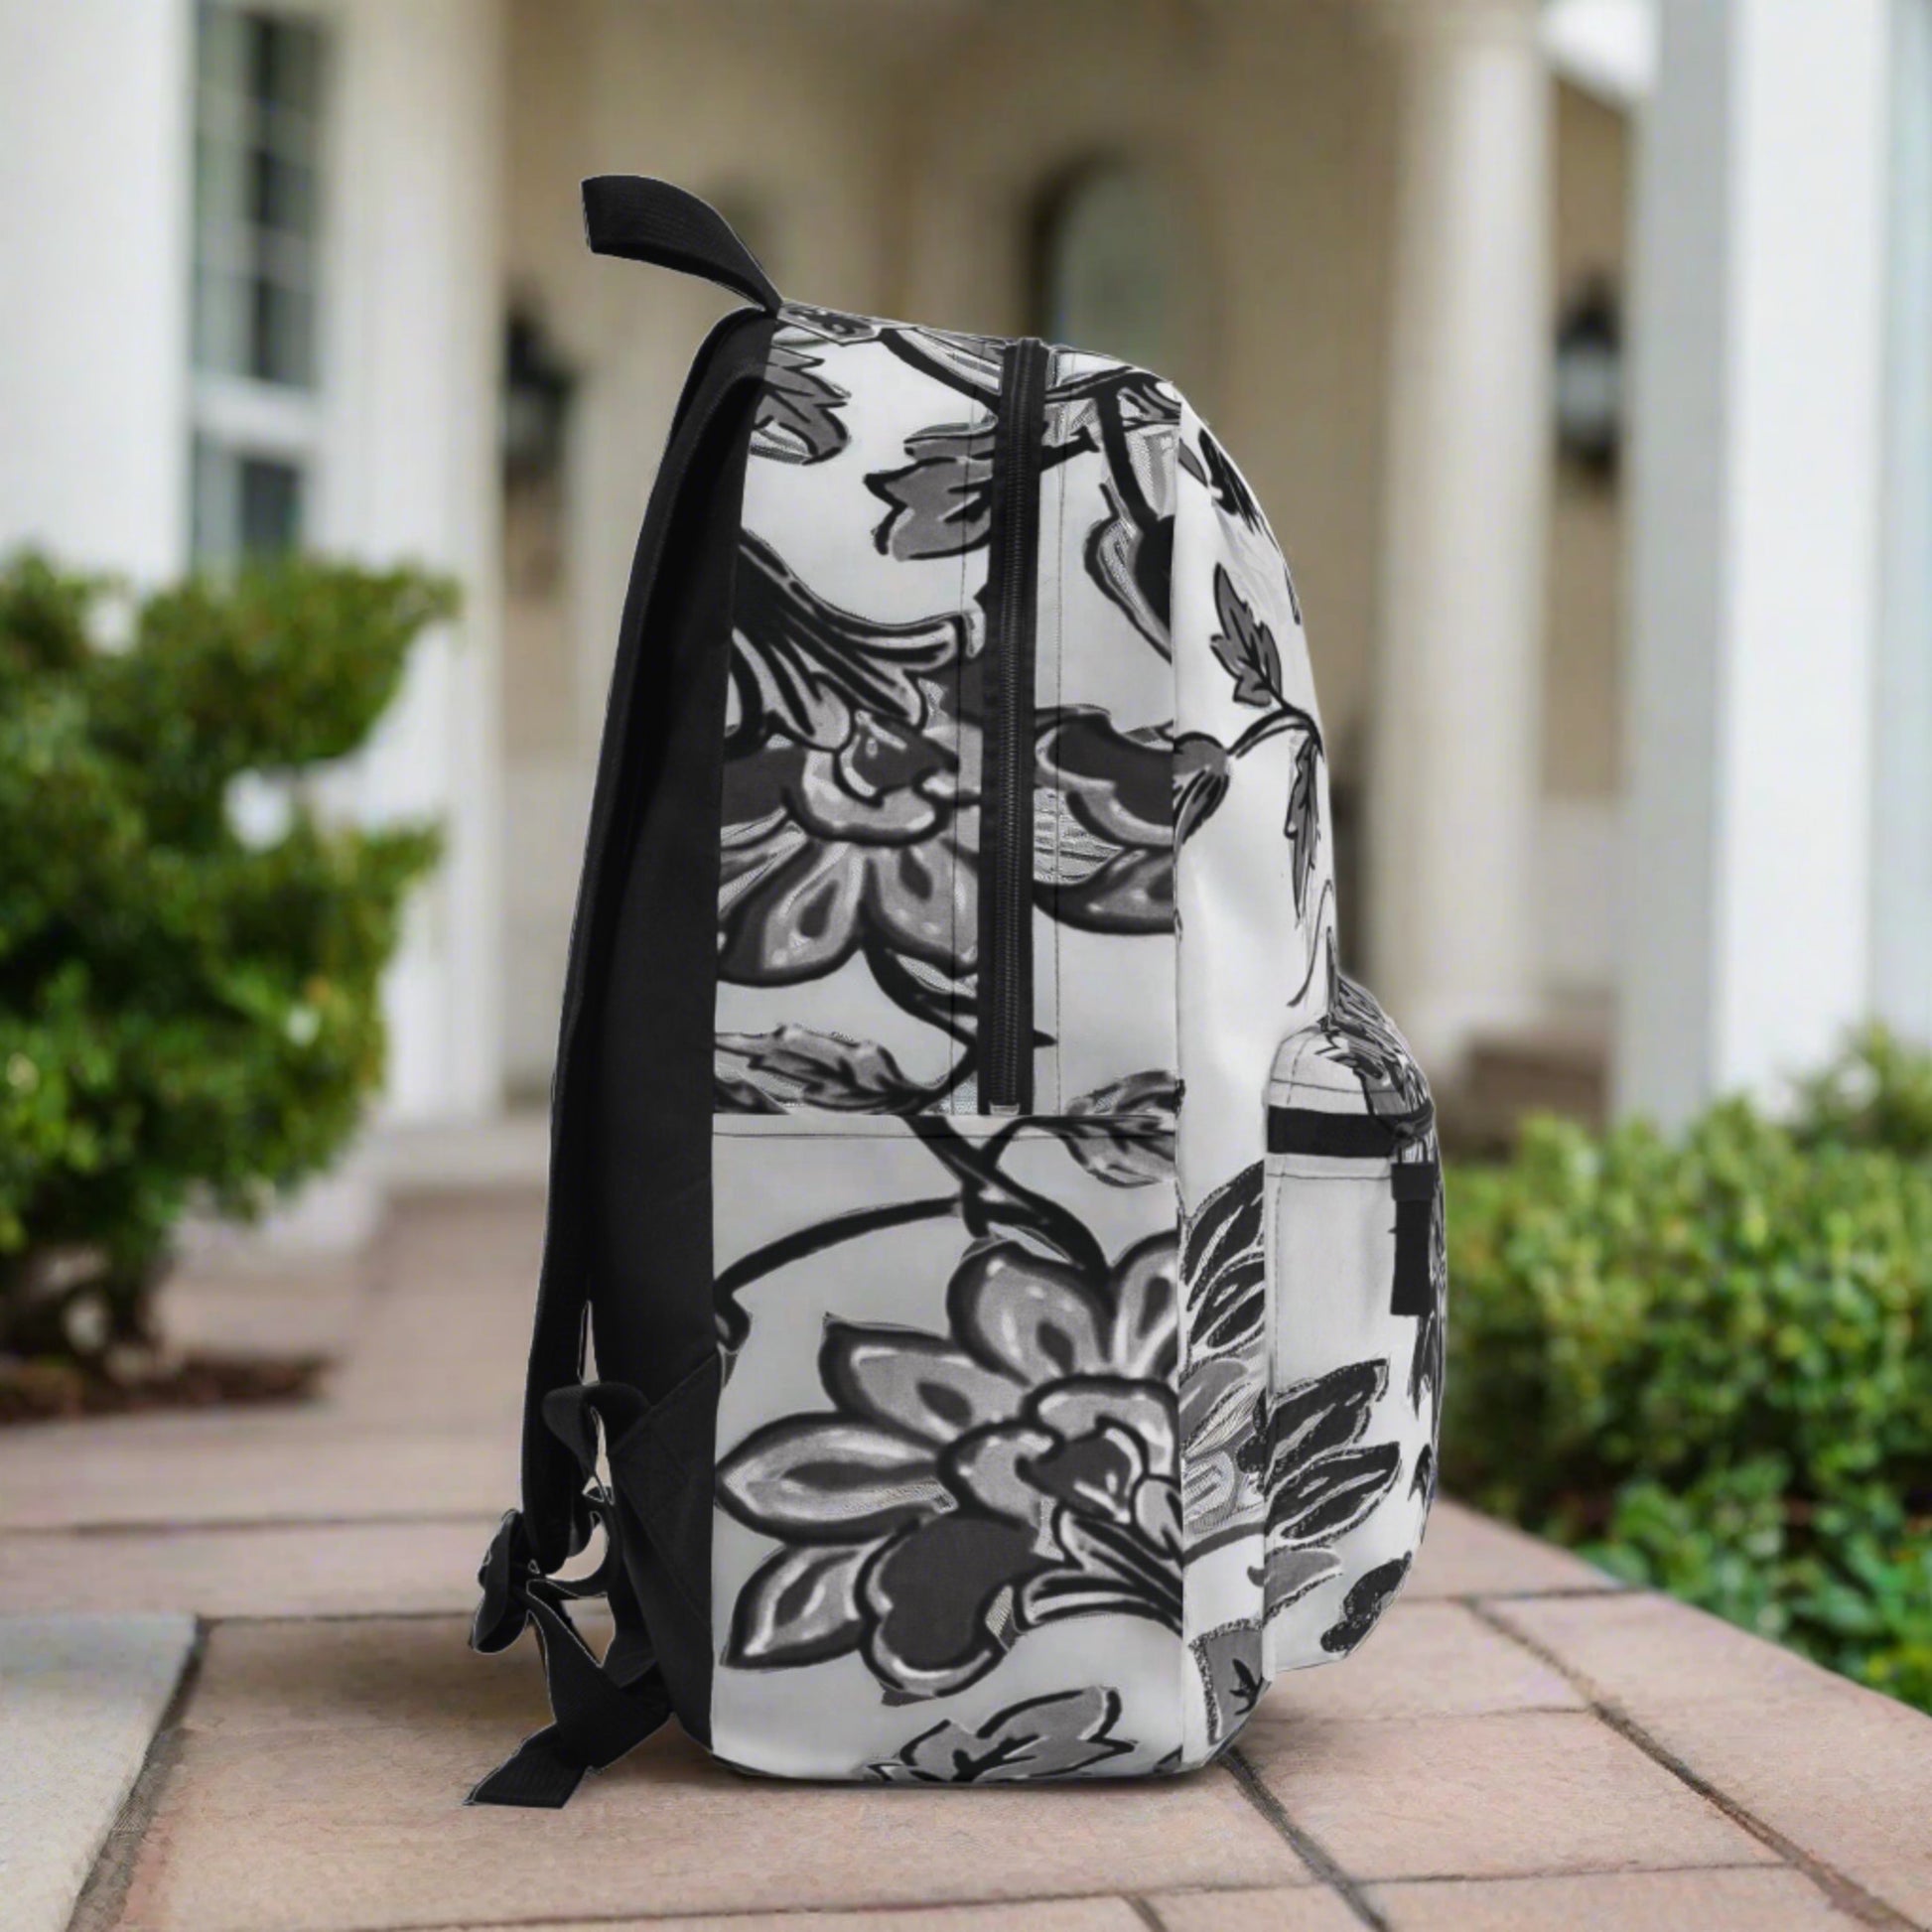 Black & white flowers are all over printed bold & clear into the durable canvas material ... beautiful and sturdy backpack with compartments and zippered front pocket - flowered decorative black & white pattern for retro lovers.